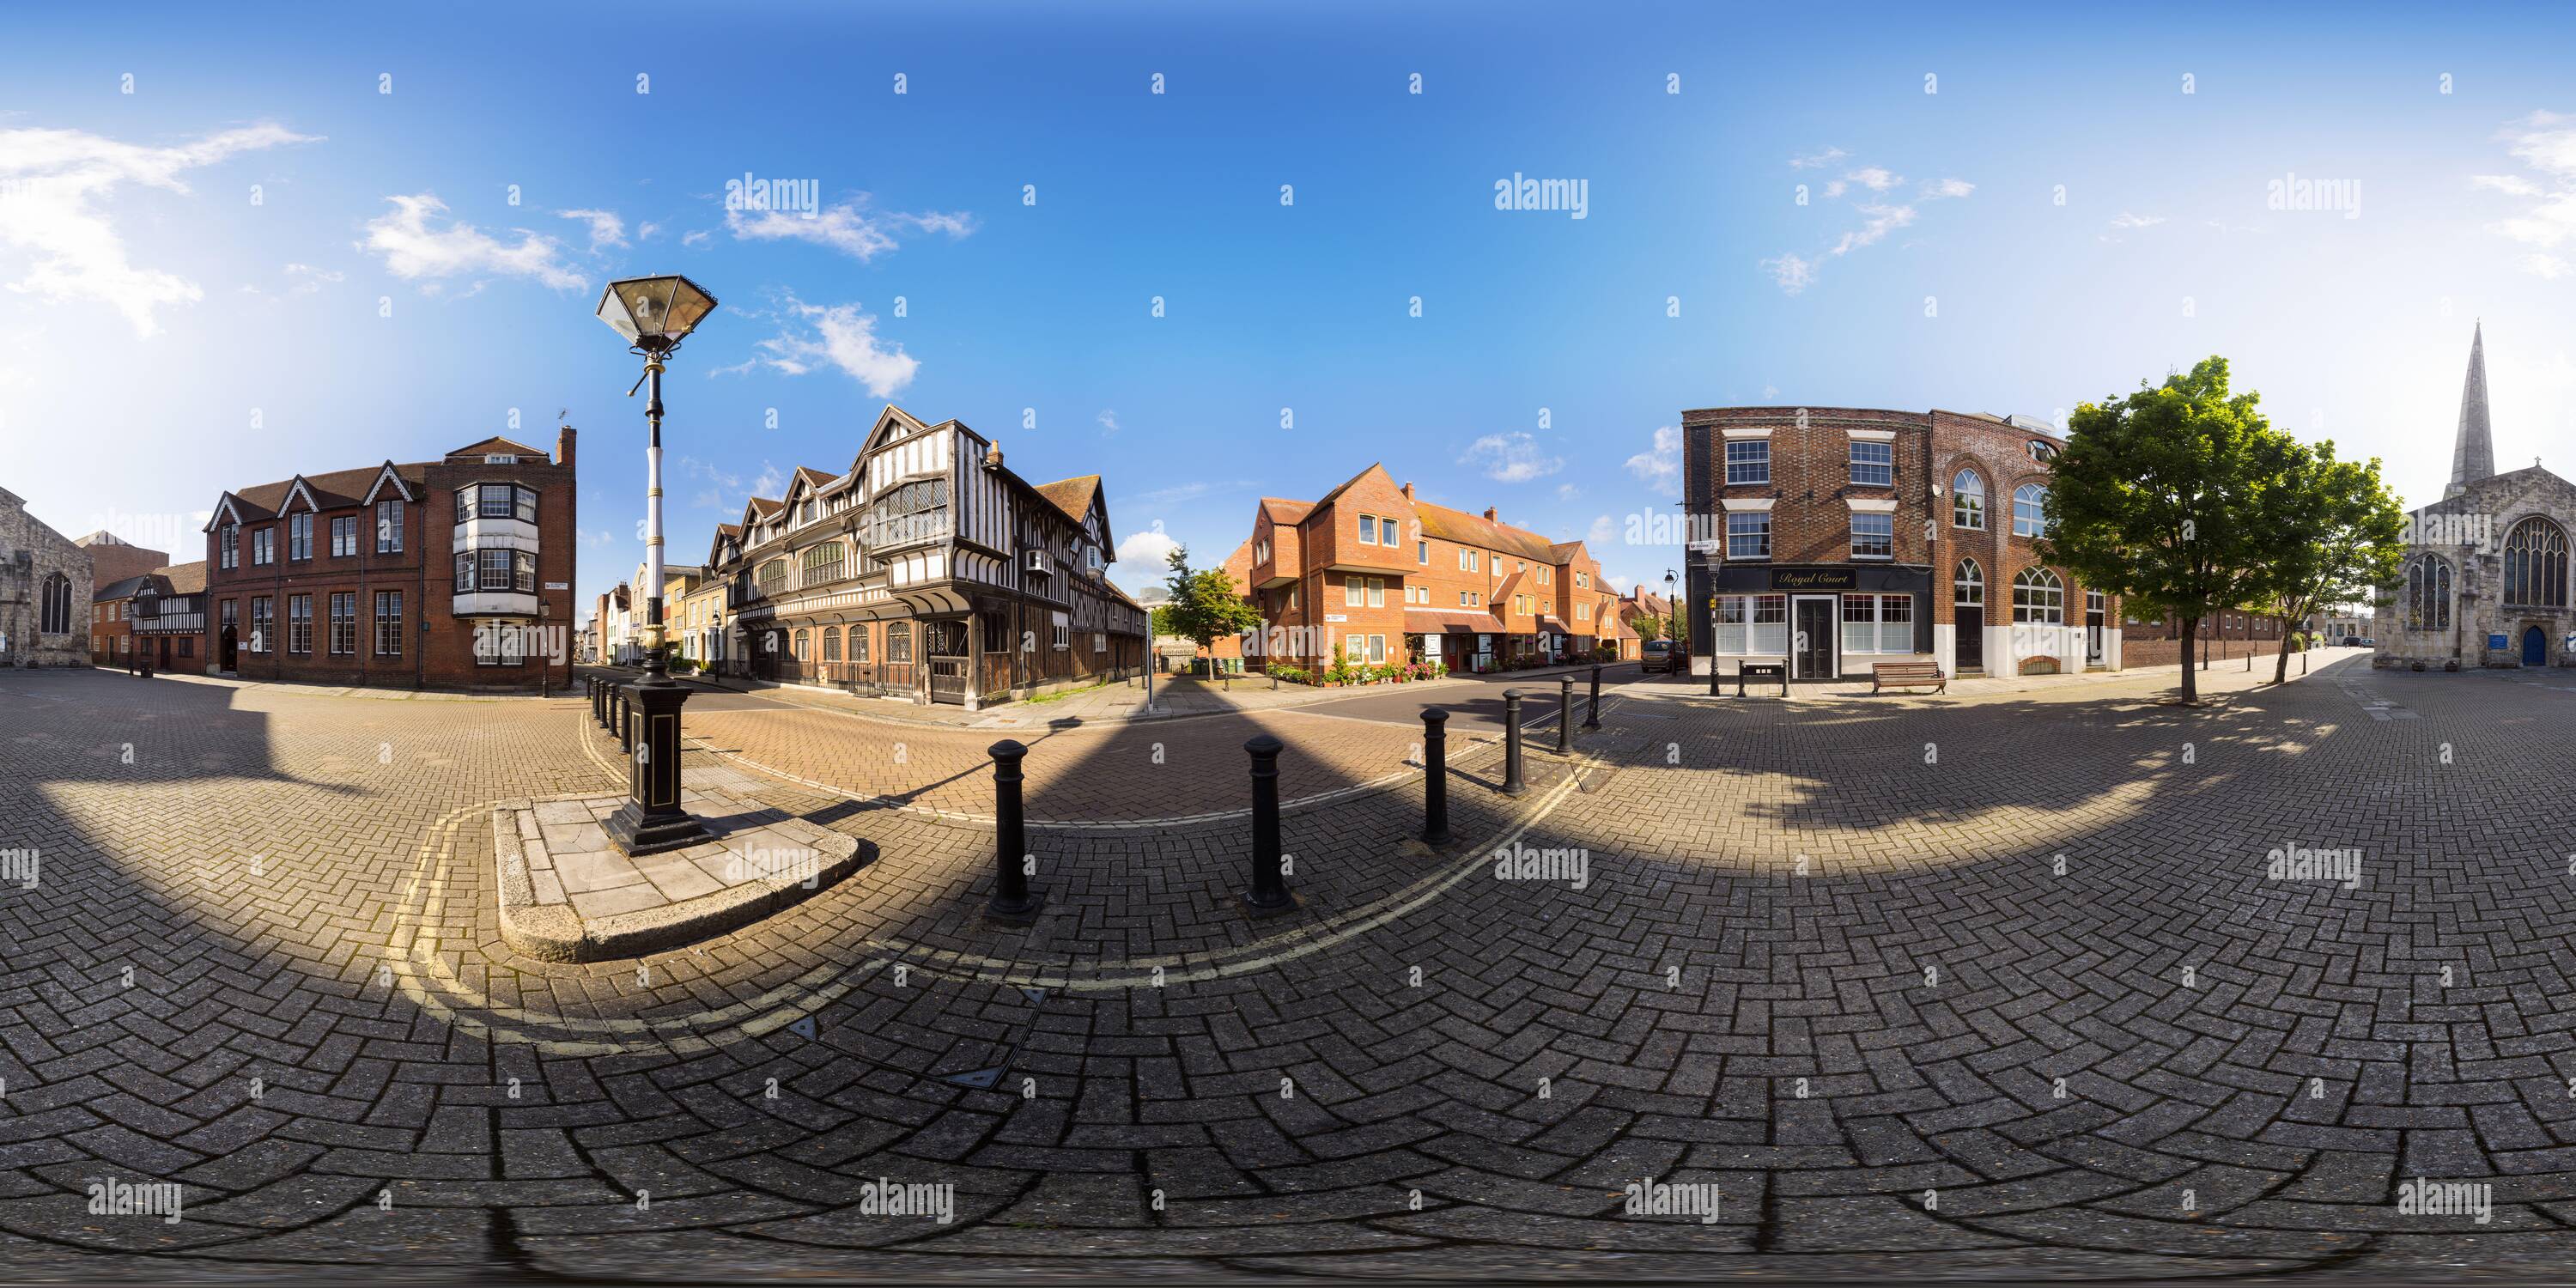 360 degree panoramic view of The Tudor House museum and historic St Michael's church in St Michael's Square off Bugle Street in Southampton's mediaeval old town.